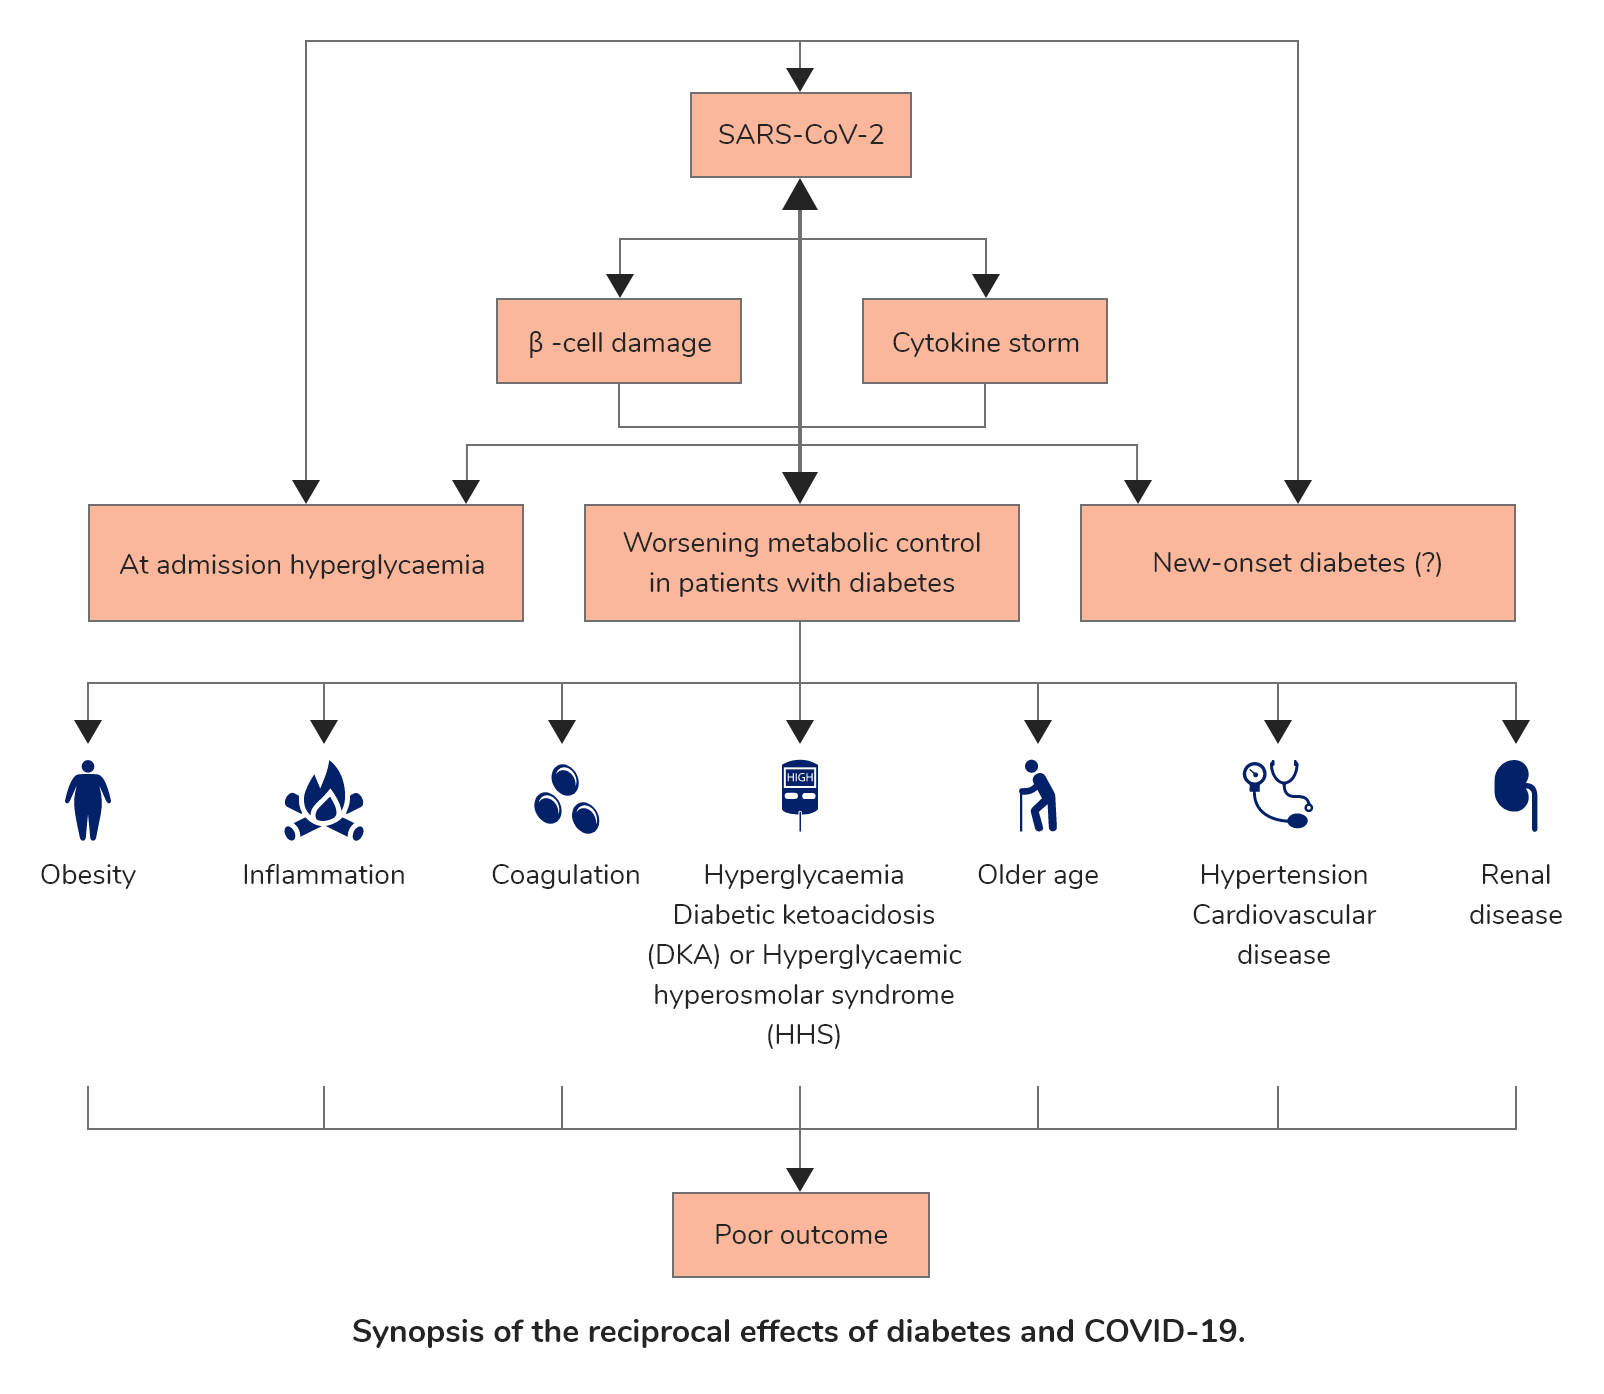 Synopsis of the reciprocal effects of diabetes and COVID-19